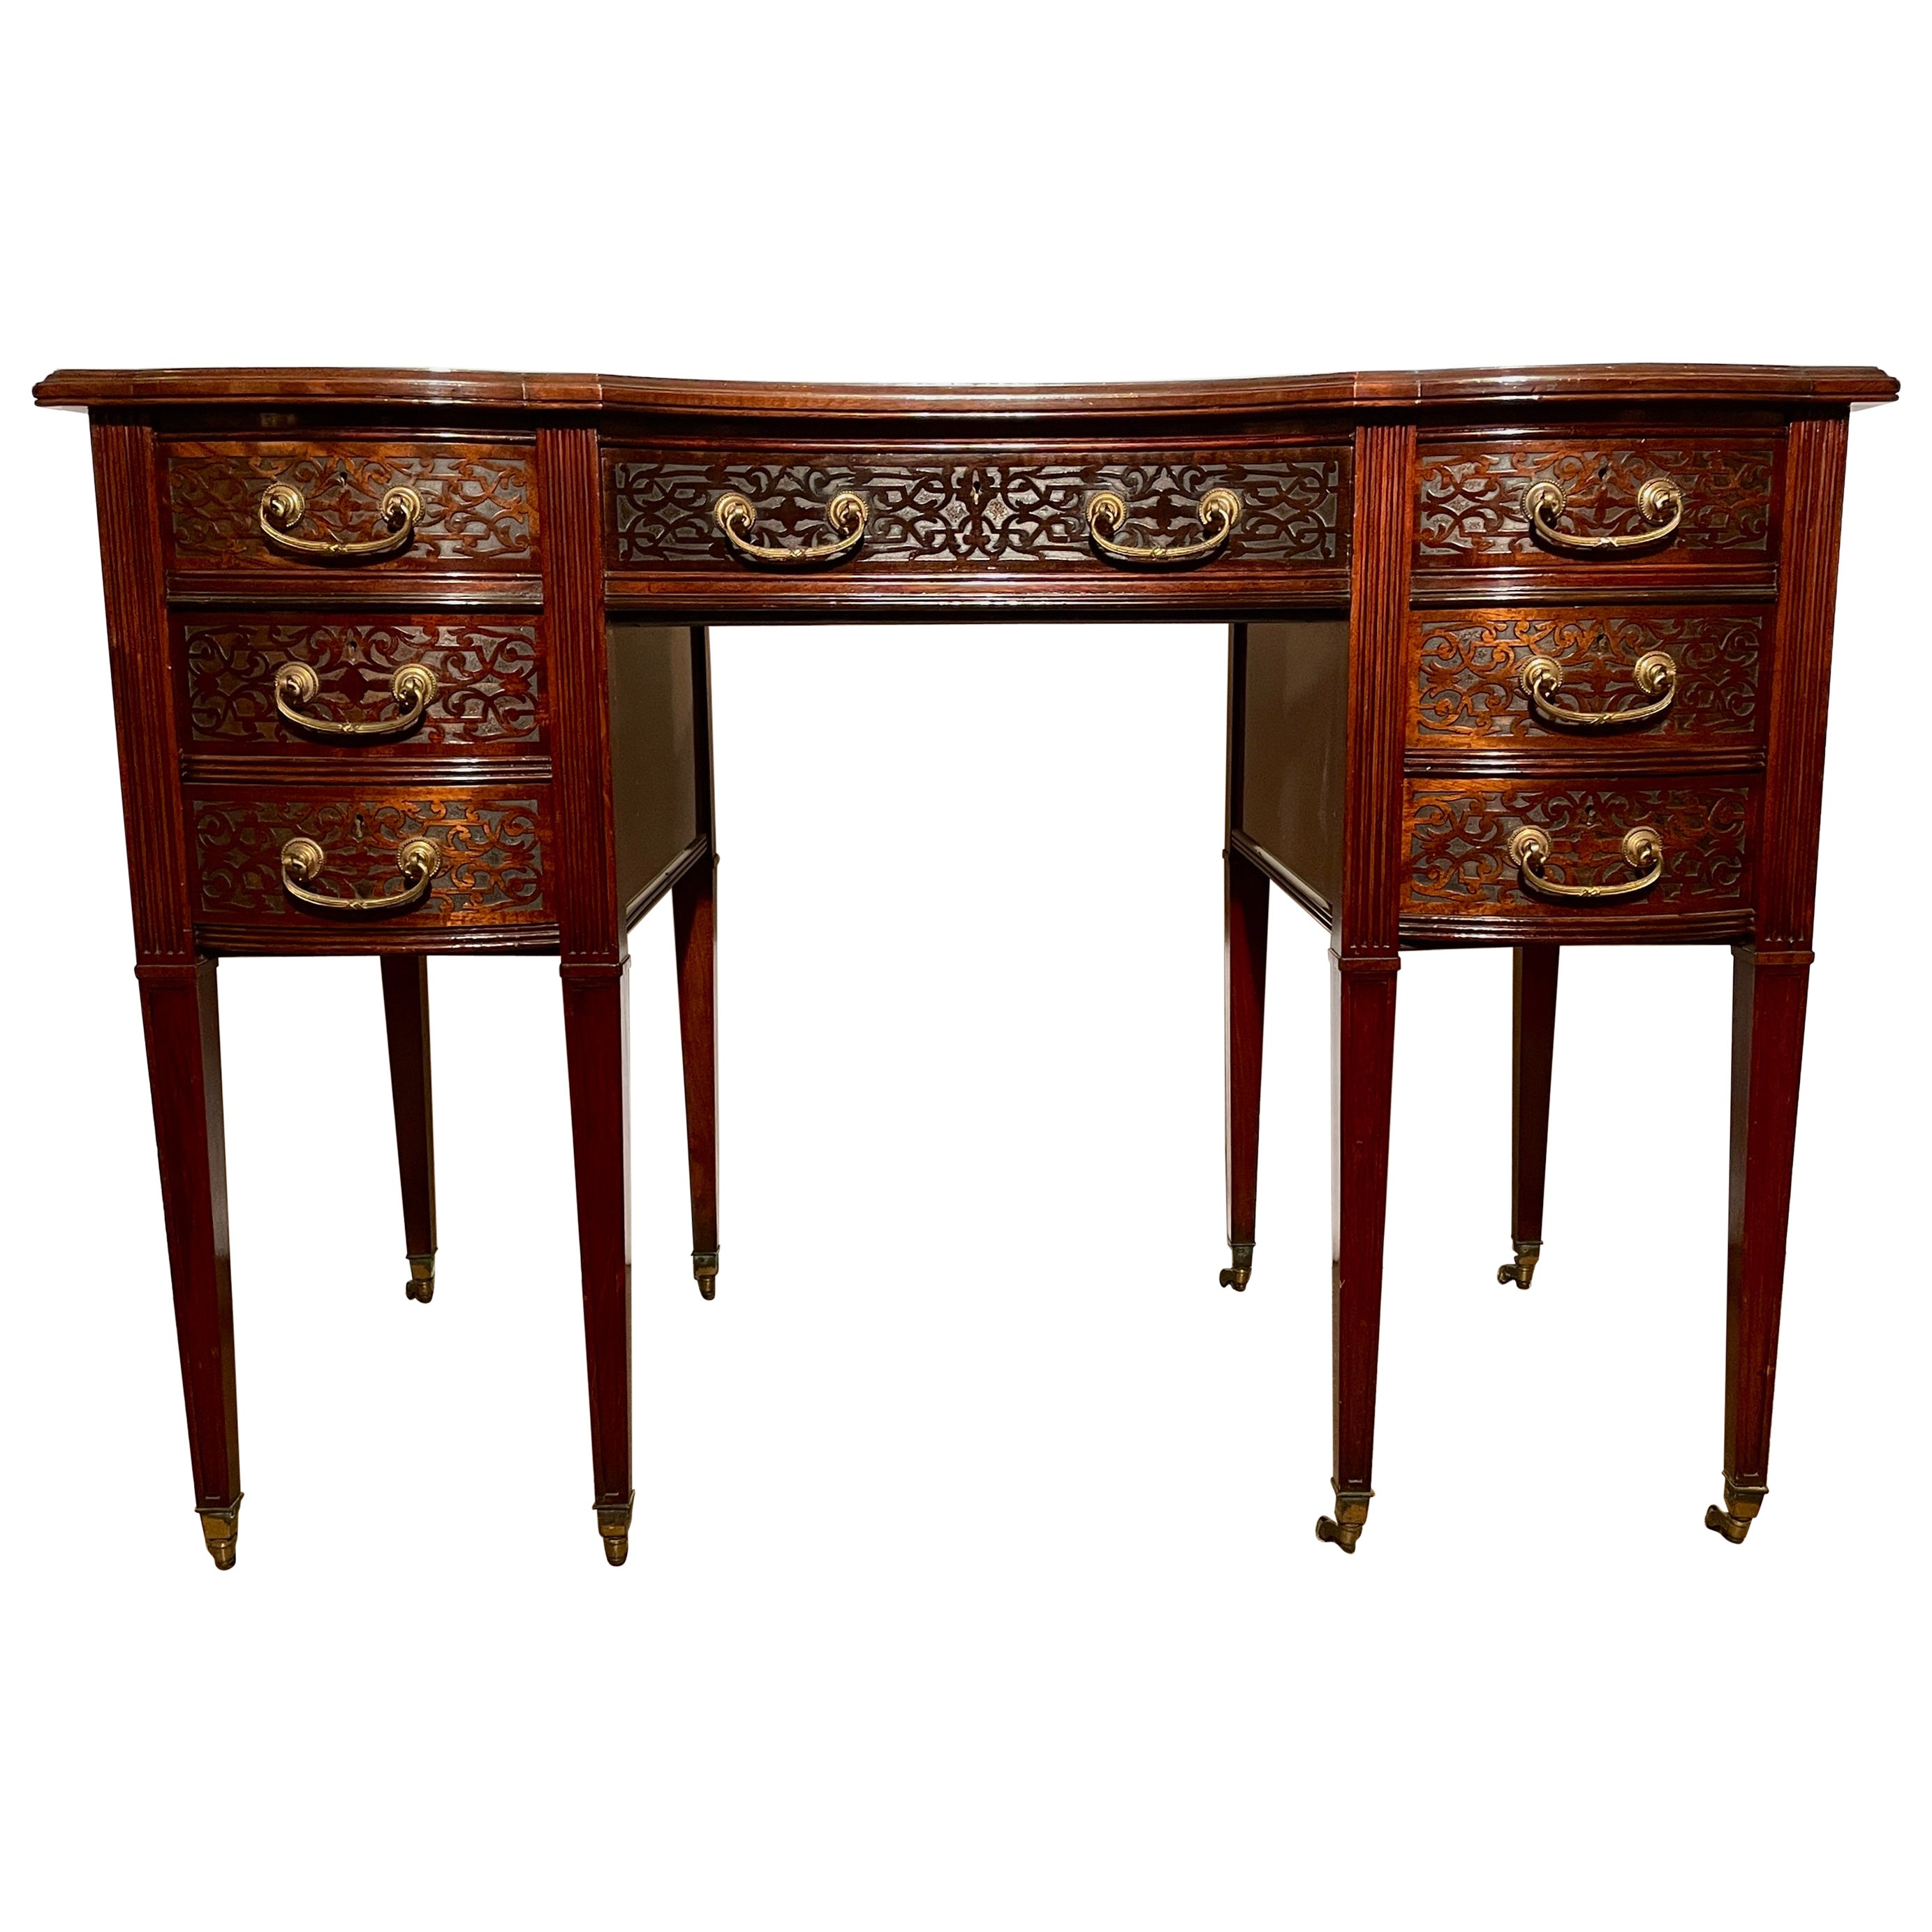 Antique English Mahogany Writing Desk with Chippendale Fretwork, circa 1880 For Sale